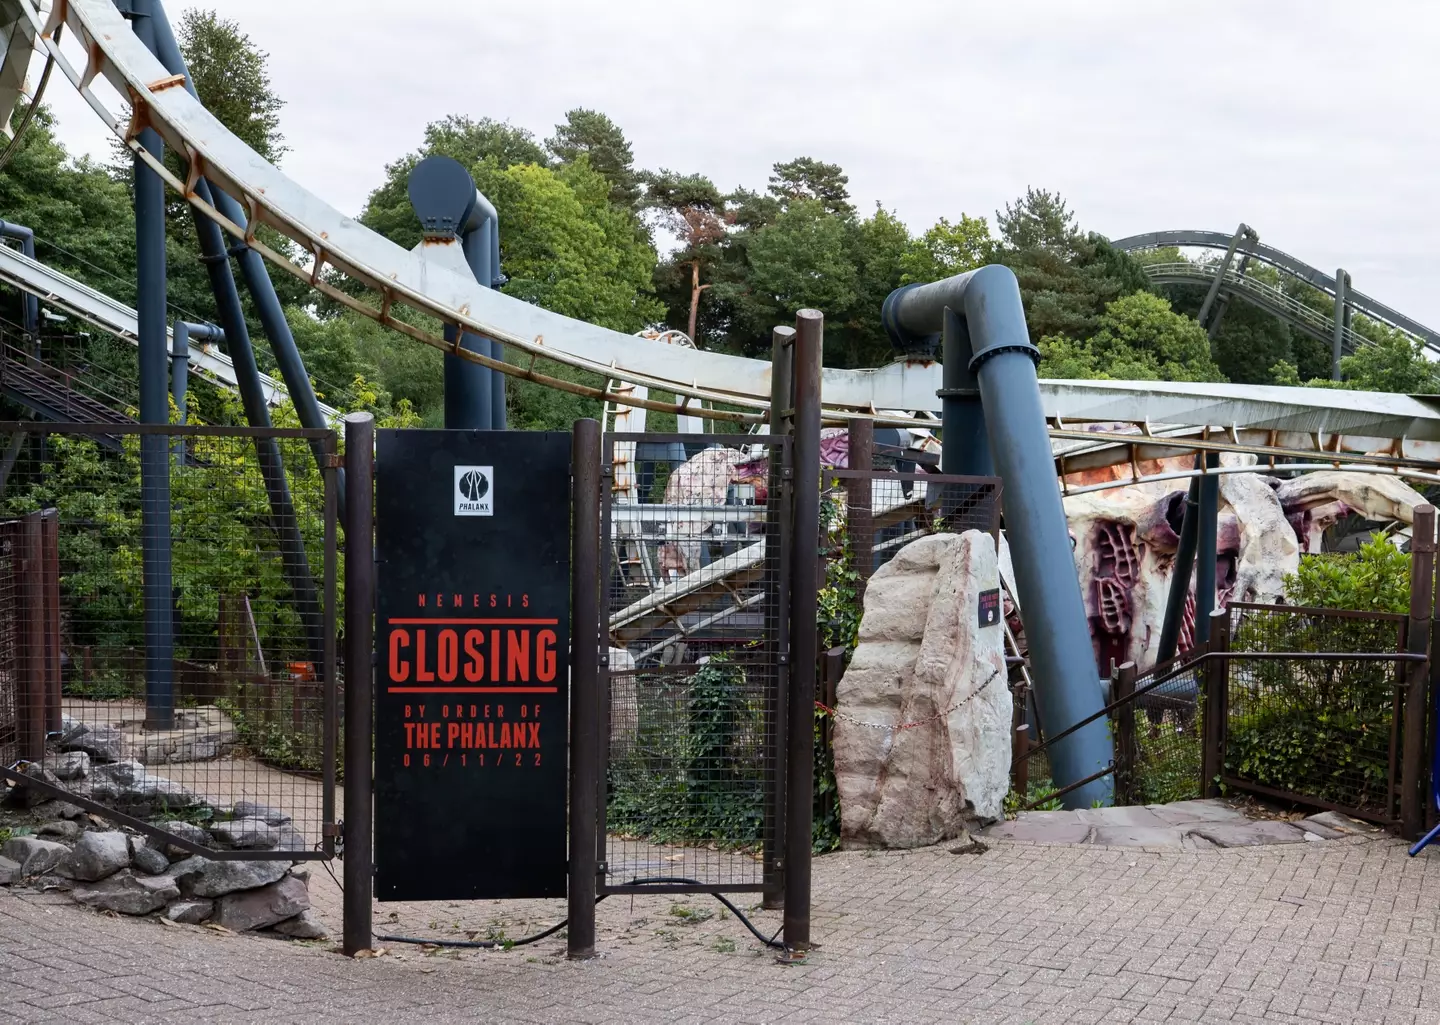 Alton Towers put posters up warning visitors of the upcoming closure.